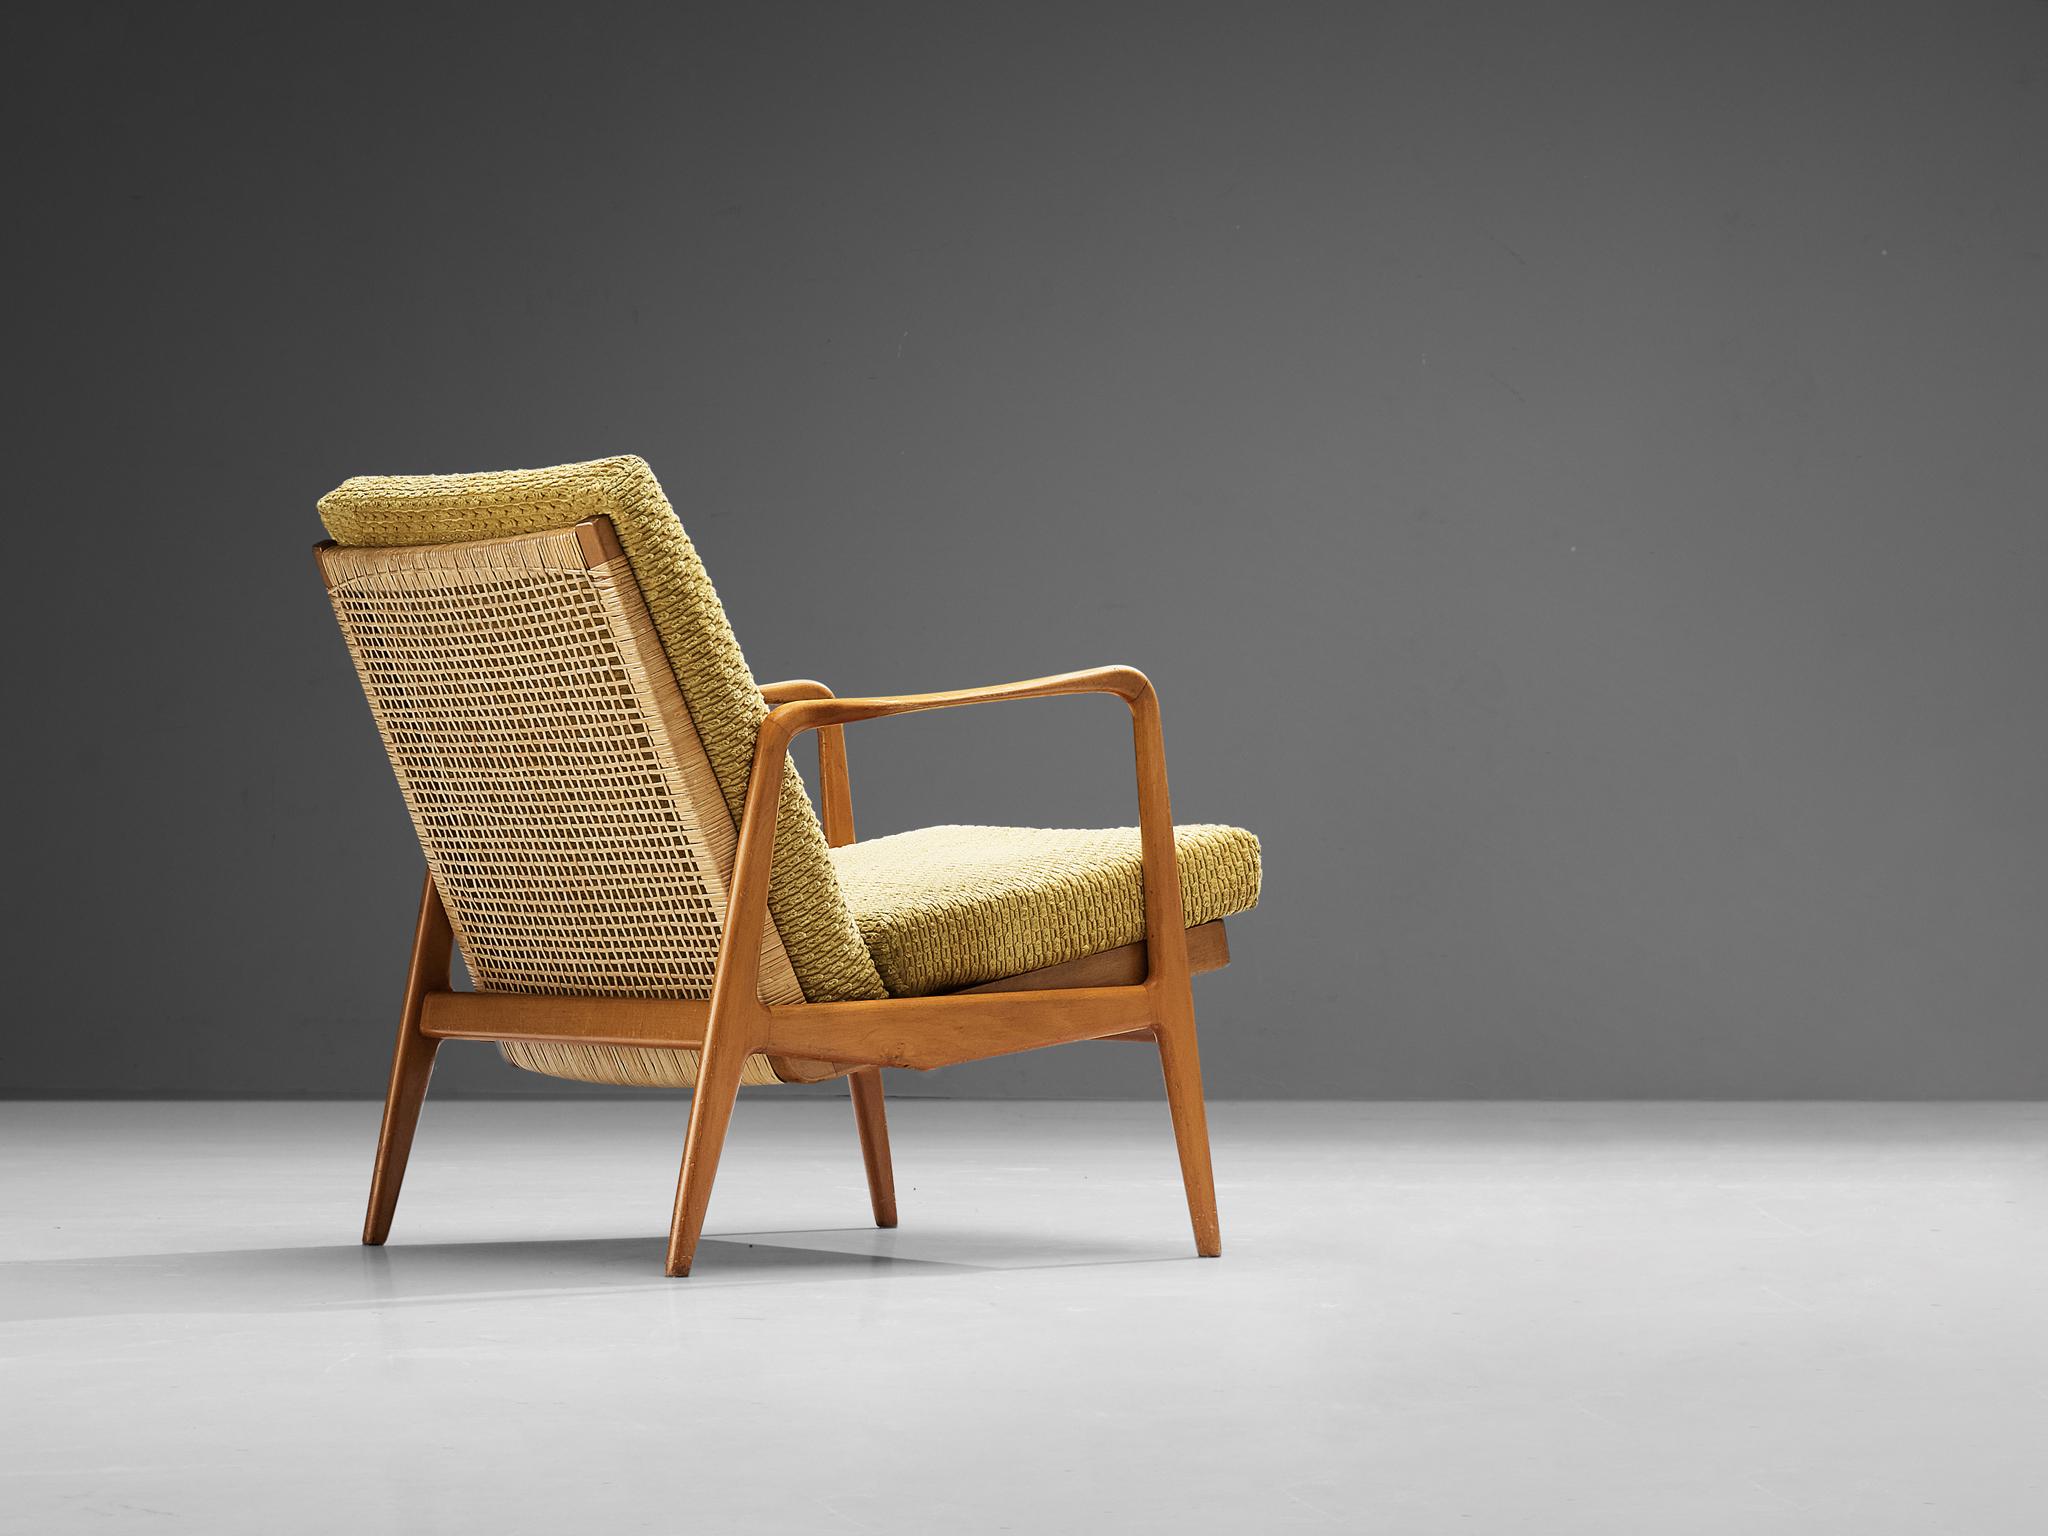 Armchair, beech, cane, fabric, Scandinavia, 1960s. 

This Scandinavian Modern easy chair resembles the designs of Hartmut Lohmeyer. Its exterior is organically shaped. The wide open wooden frame features a slightly tilted back made out of cane.